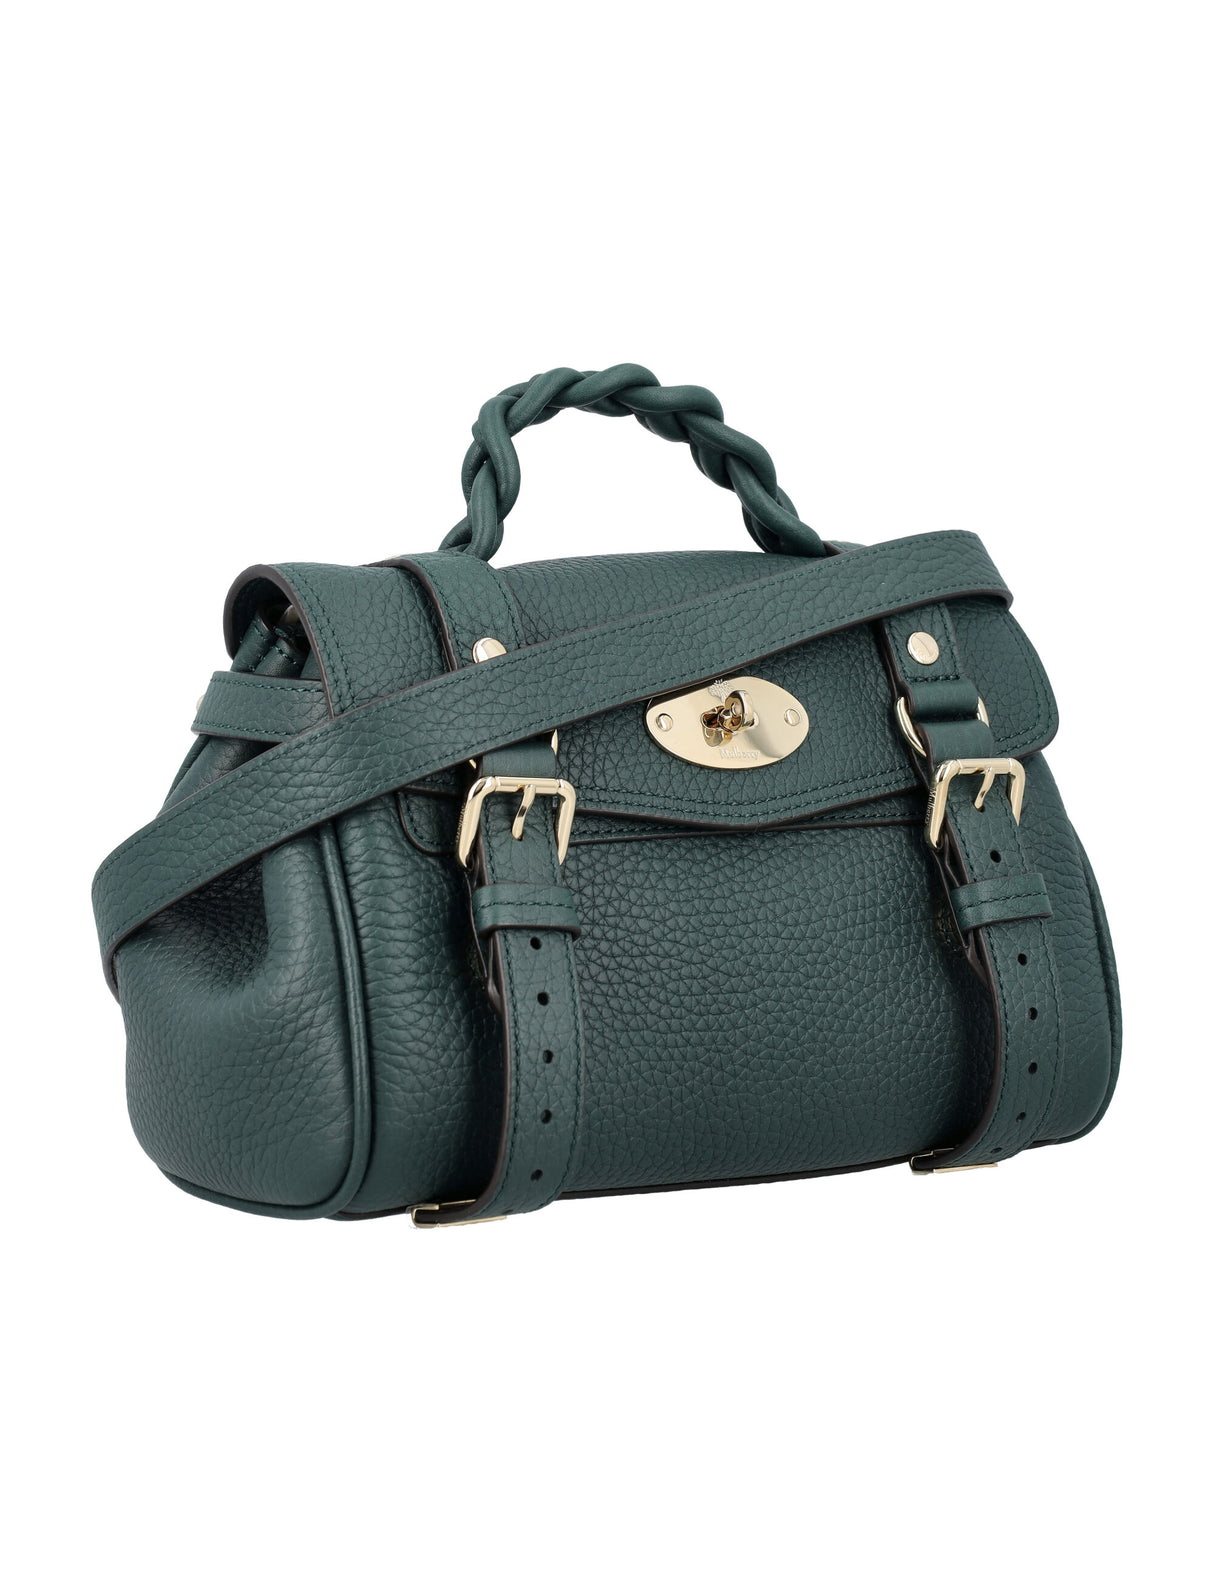 MULBERRY Mini Alexa Green Leather Shoulder Bag with Braided Handle and Postman's Lock